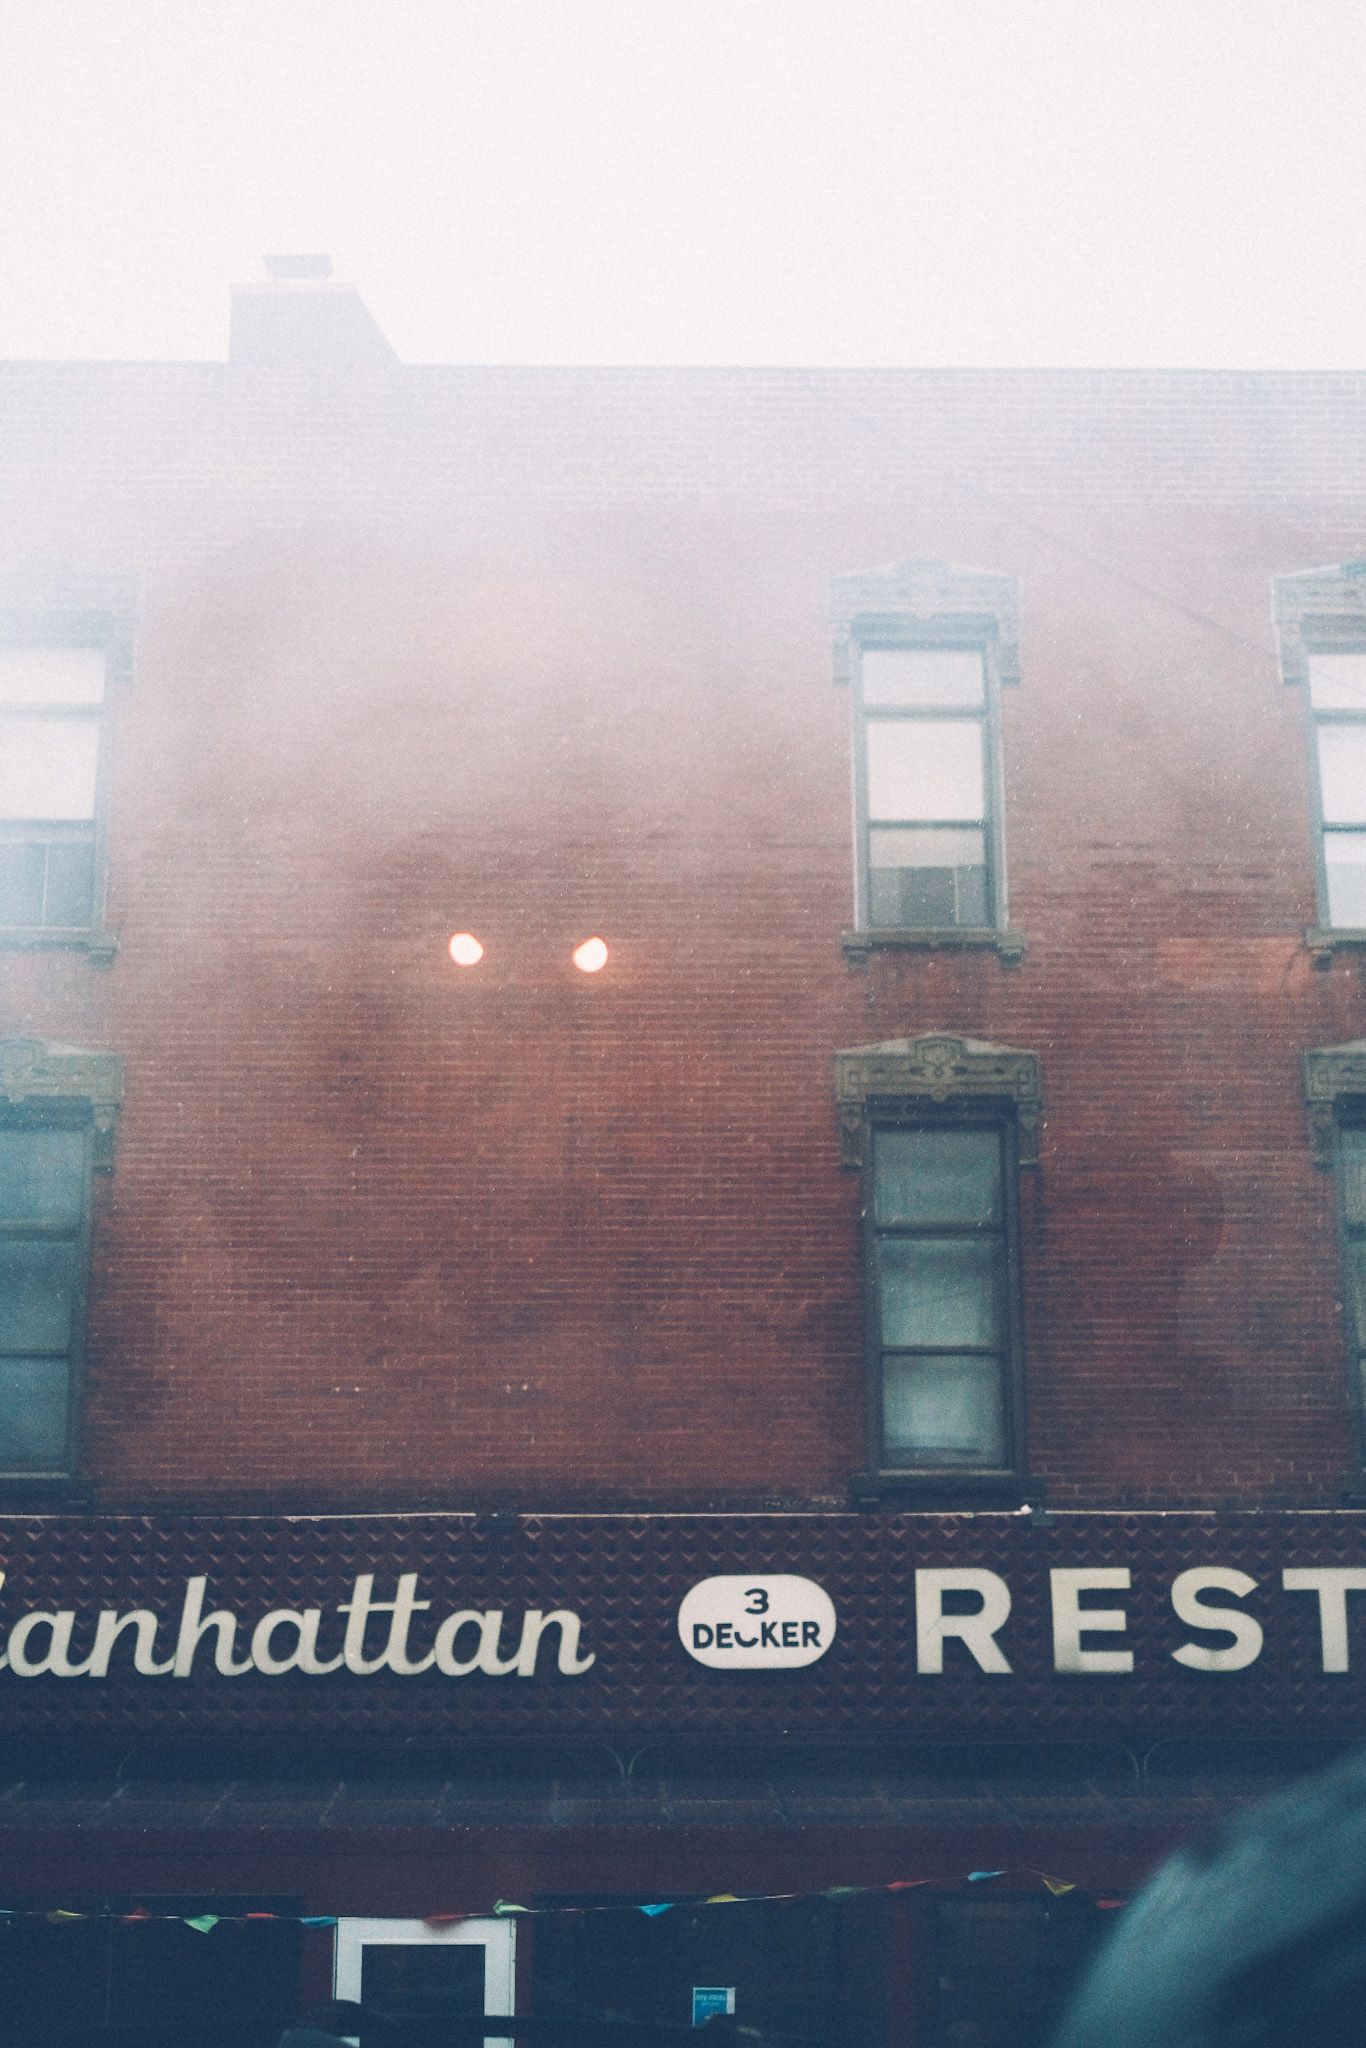 In the fog, a brick building ascends into the cloudy sky above, with the cutoff words “Manhattan Restaurant” and “3 decker” on the bottom.